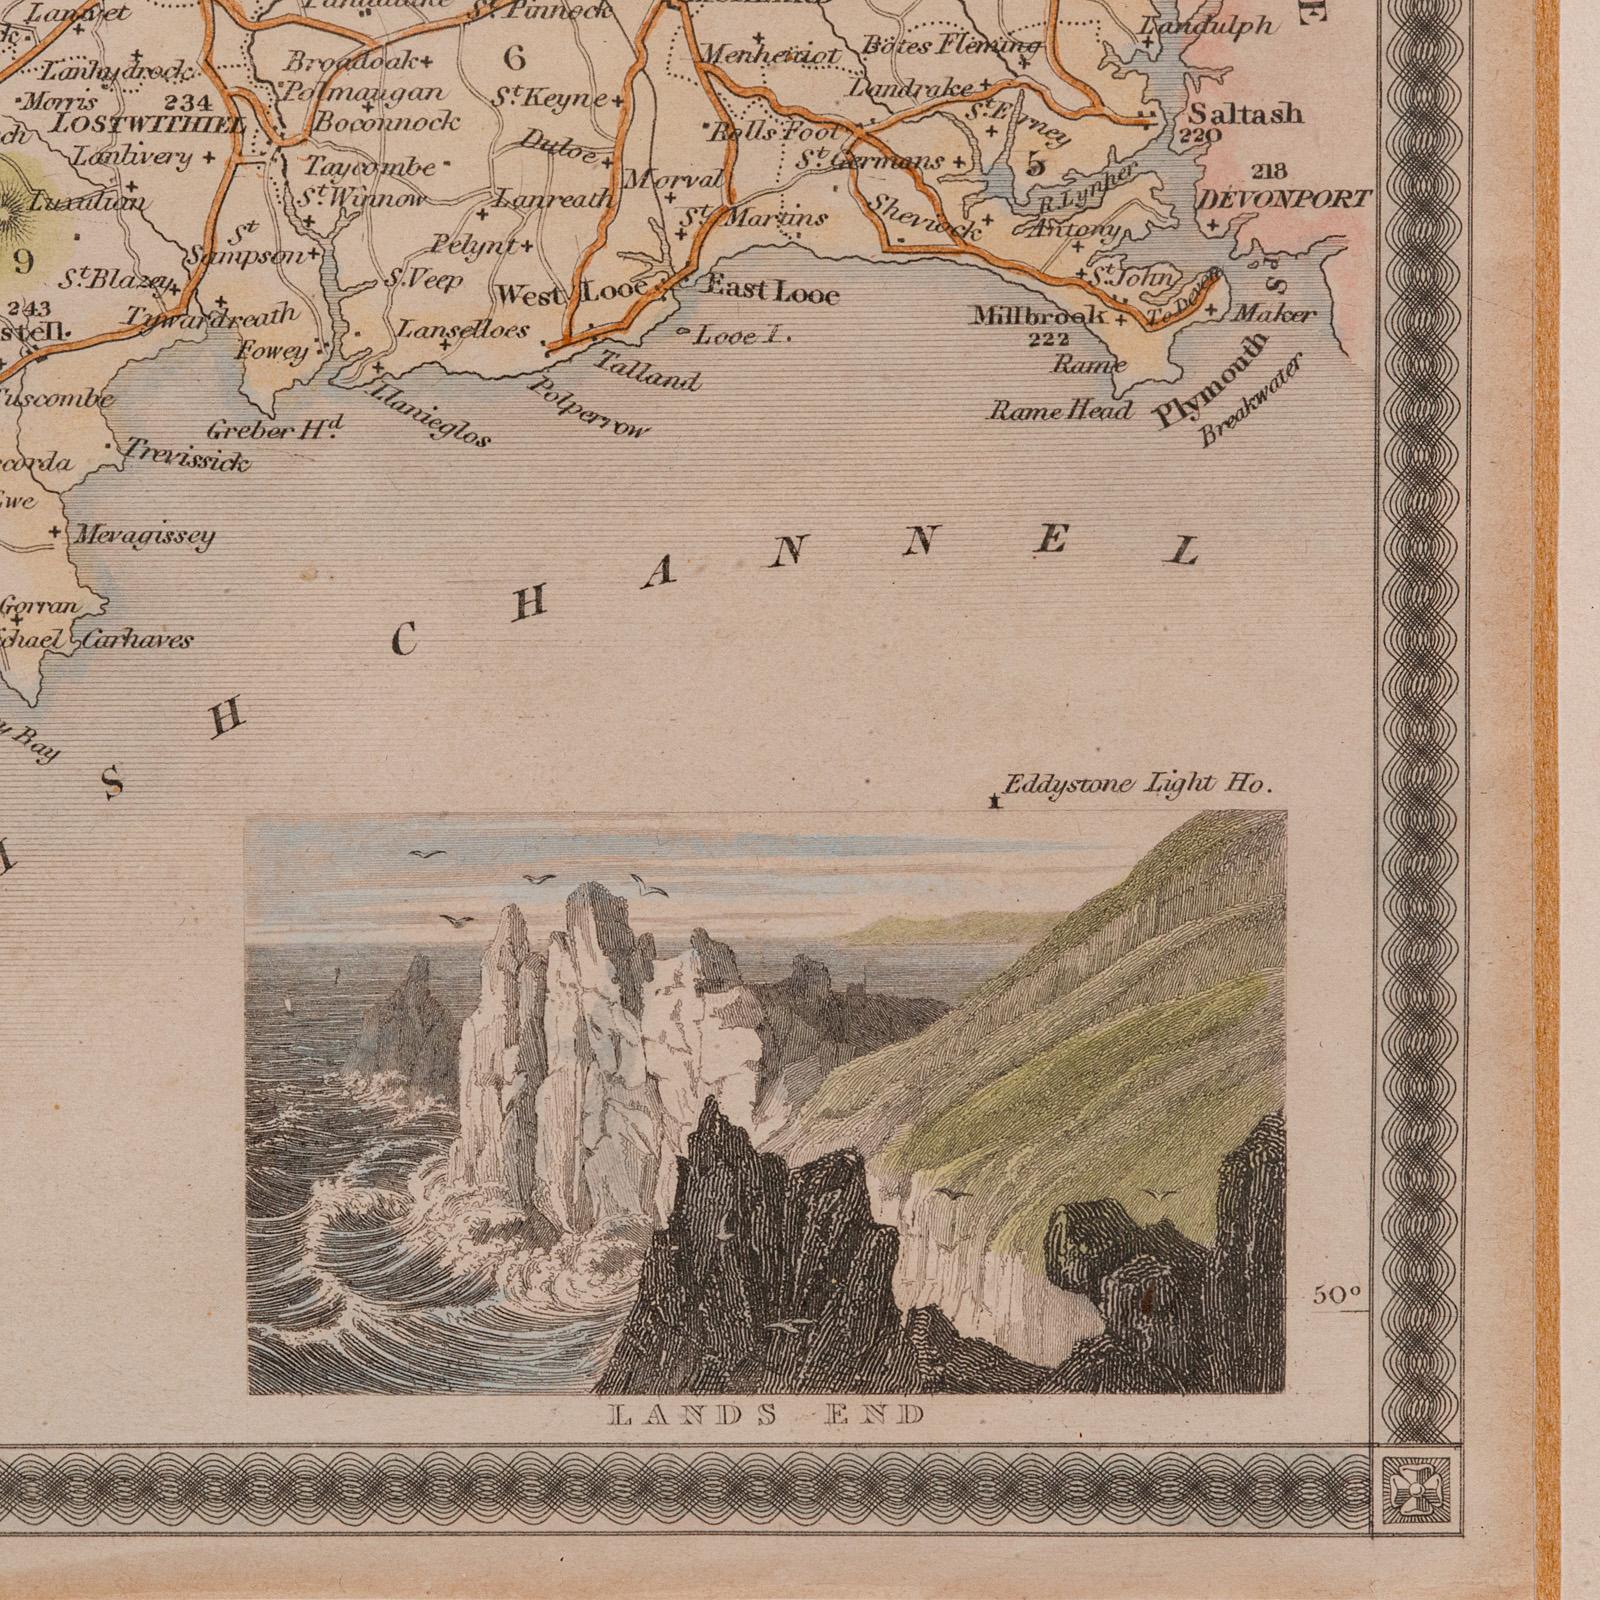 19th Century Antique Lithography Map, Cornwall, English Framed Engraving, Cartography, C.1850 For Sale